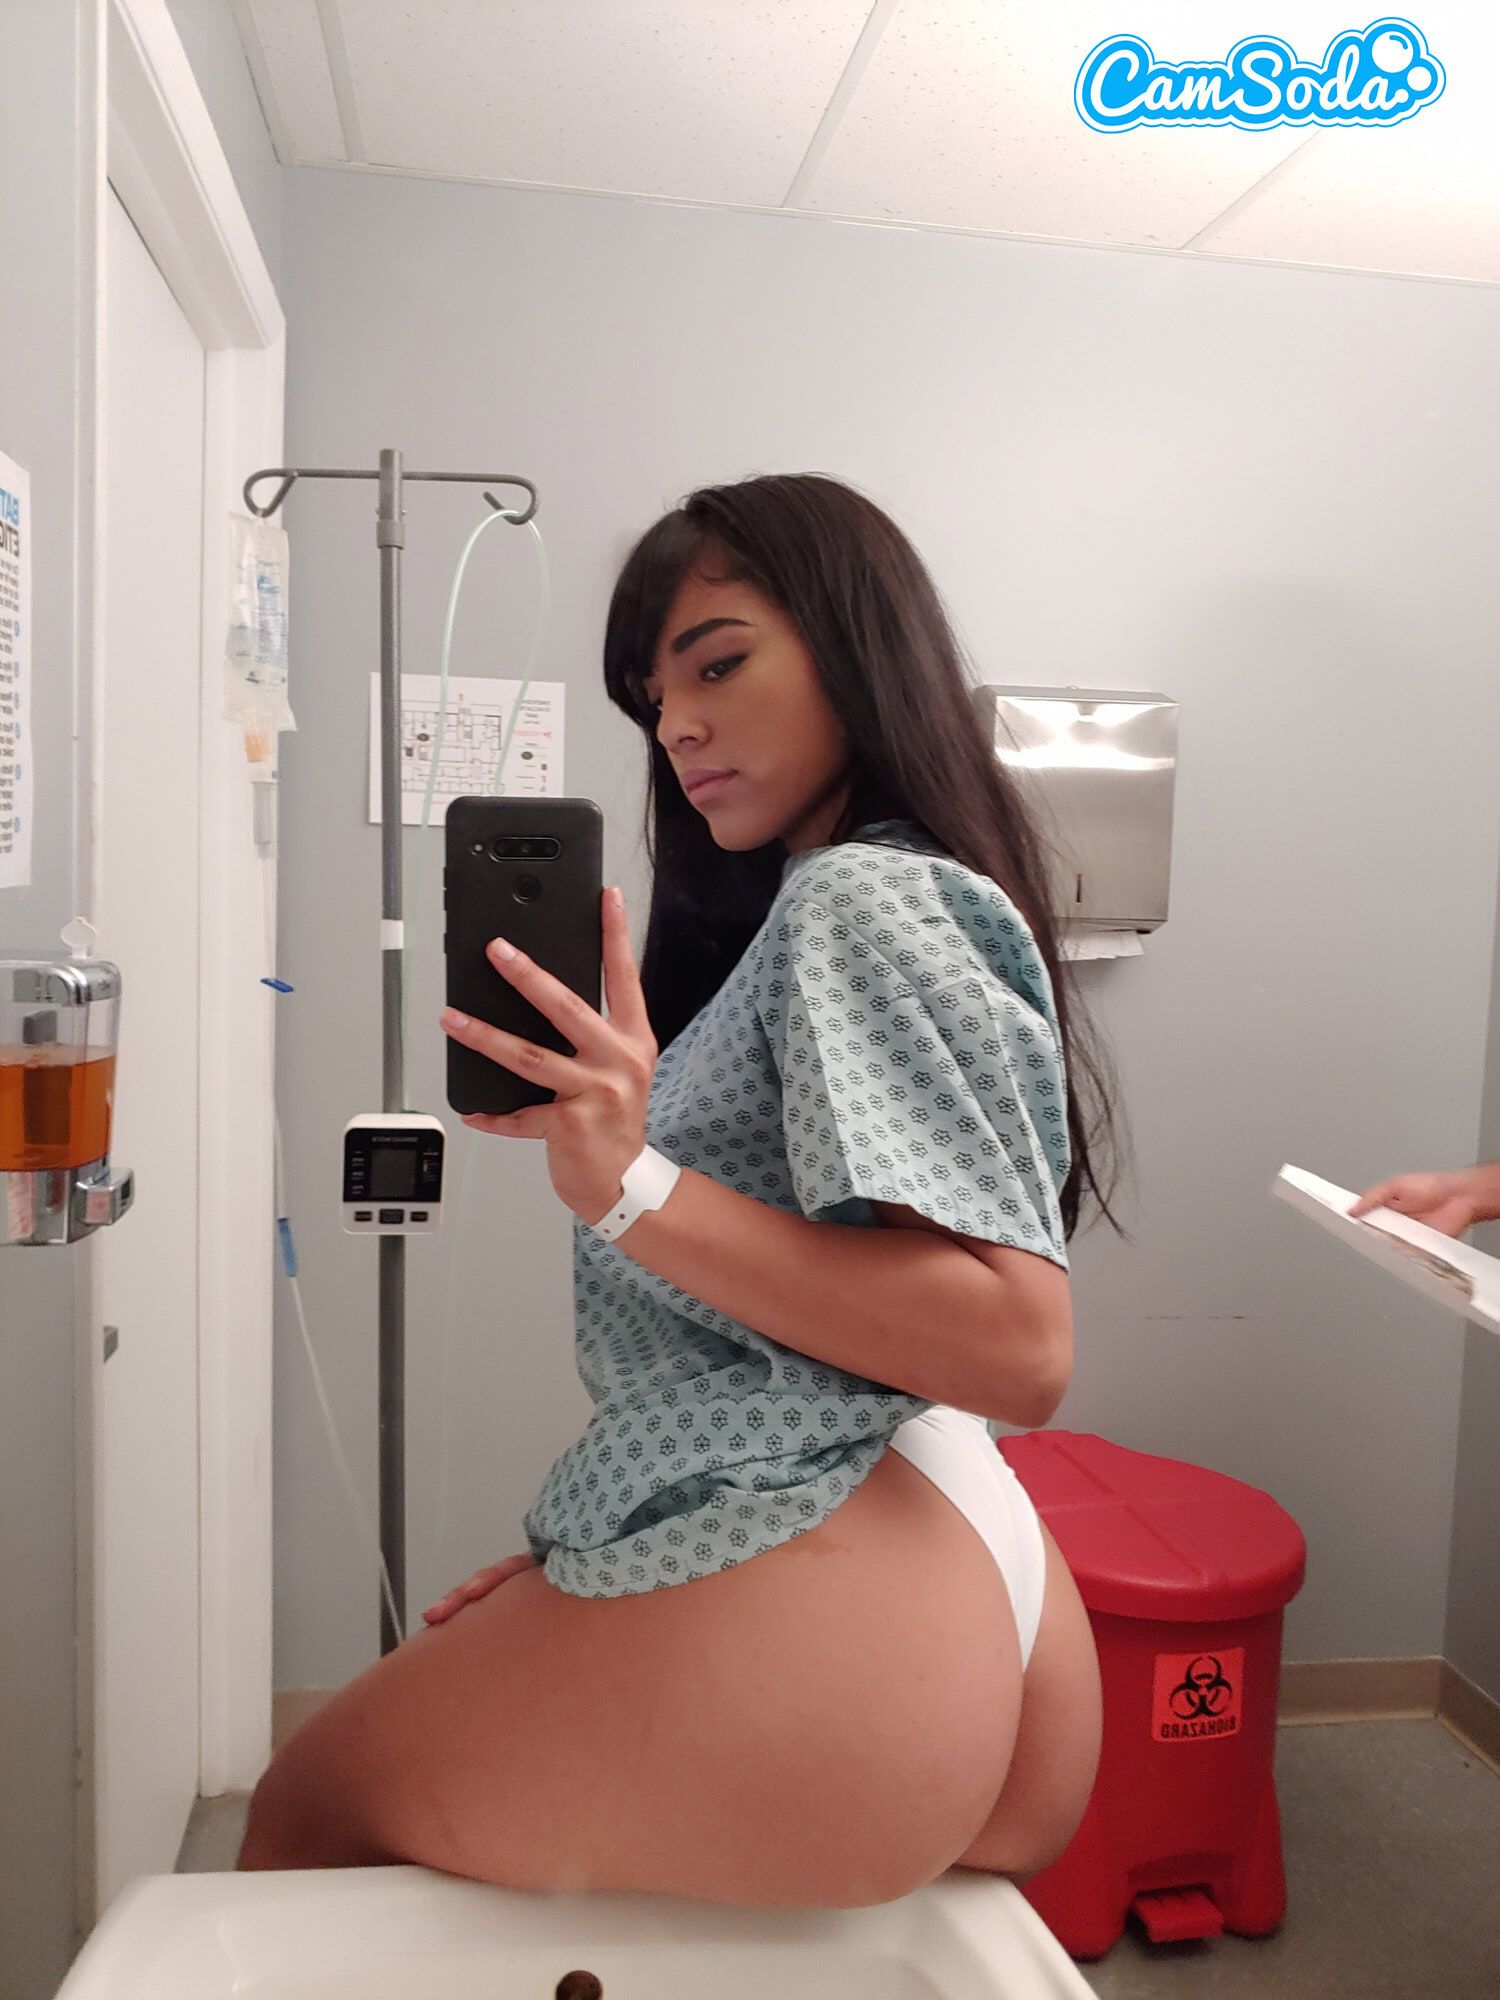 Big bootied latina teen gets horny in the ER #20